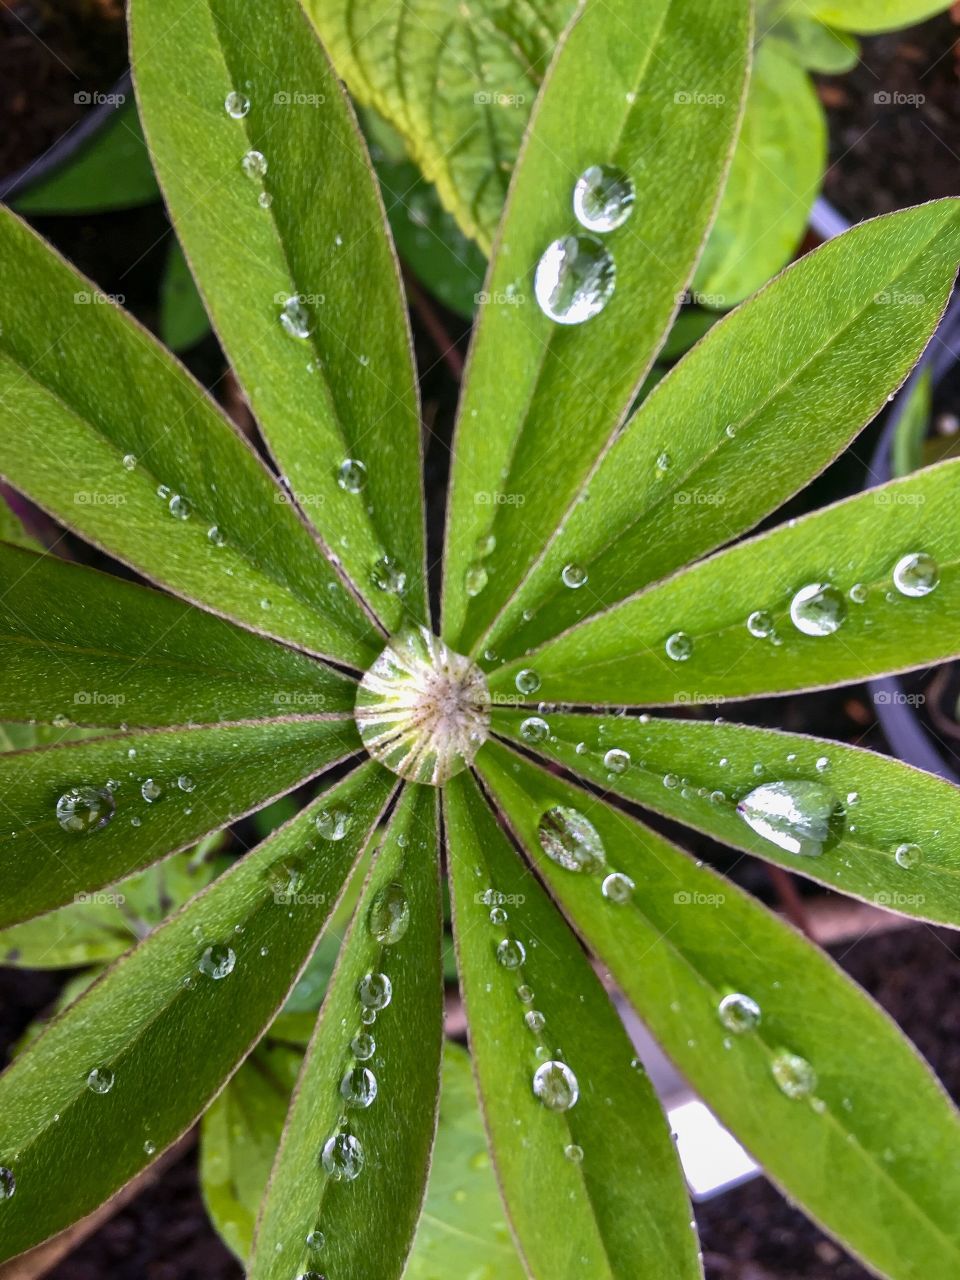 Stillness in motion, stillness in time, surface tension of water droplets, nature in isolation.